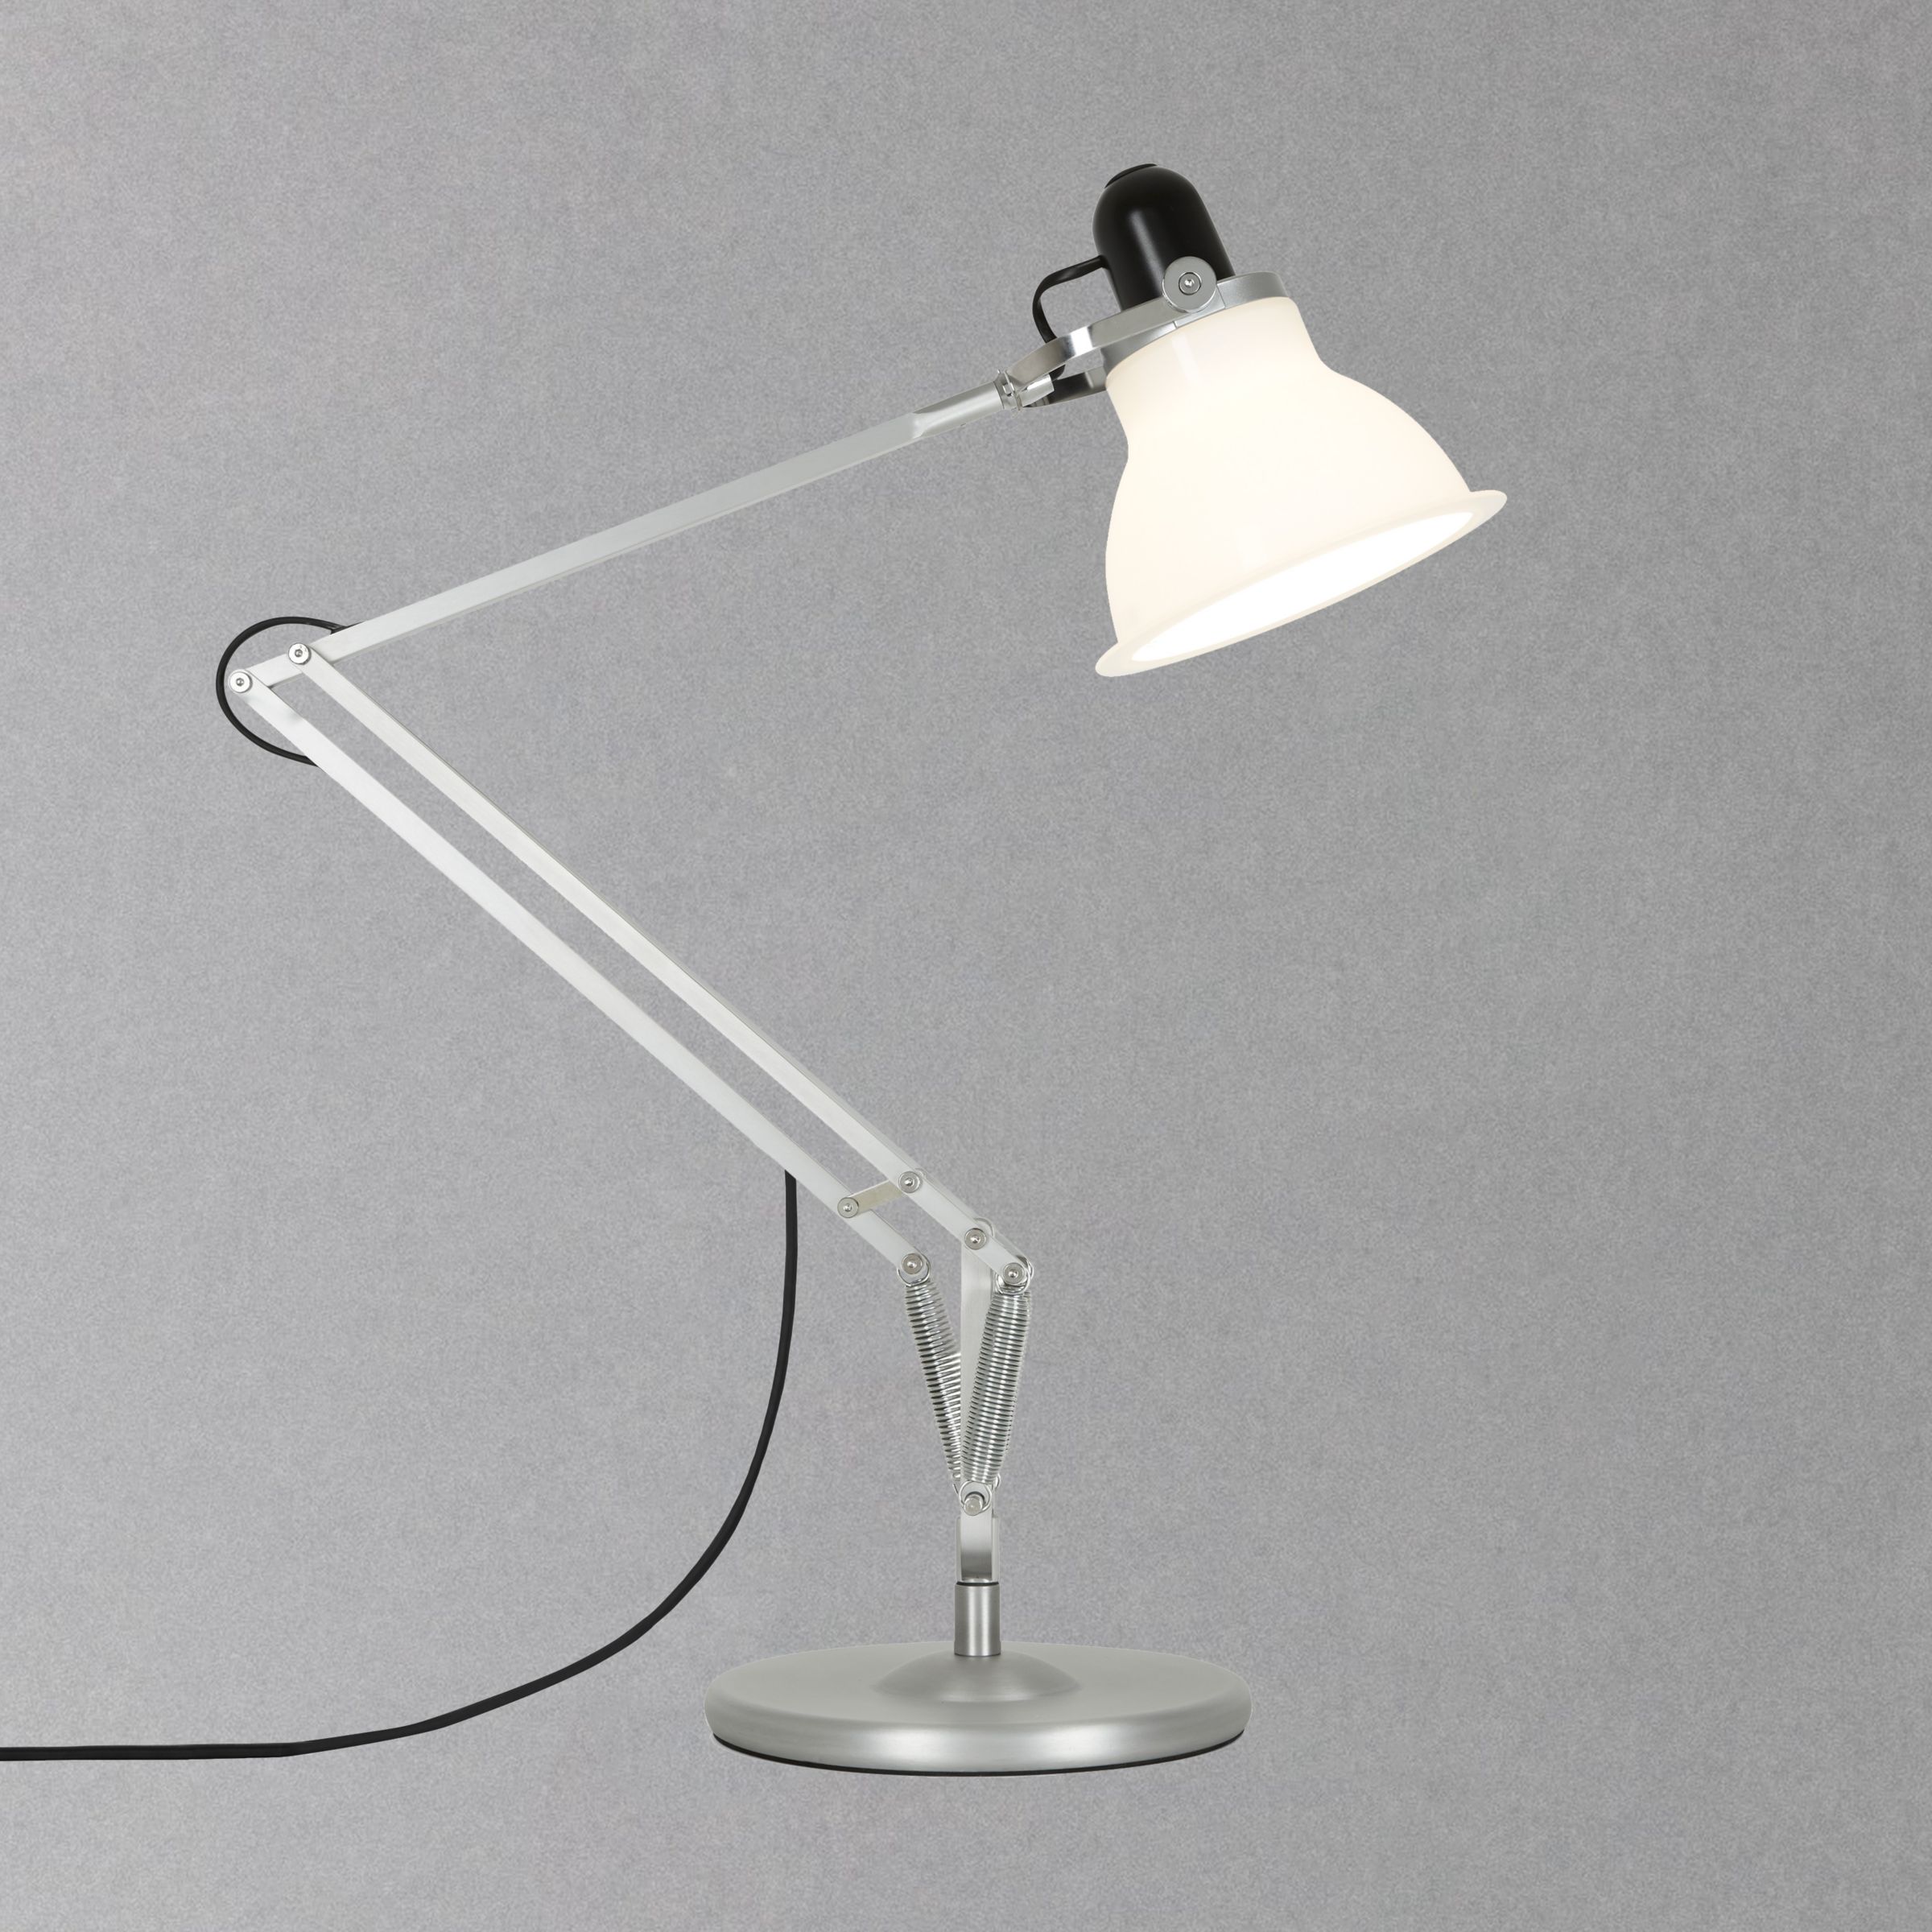 Anglepoise Type 1228 Desk Lamp At John Lewis Partners